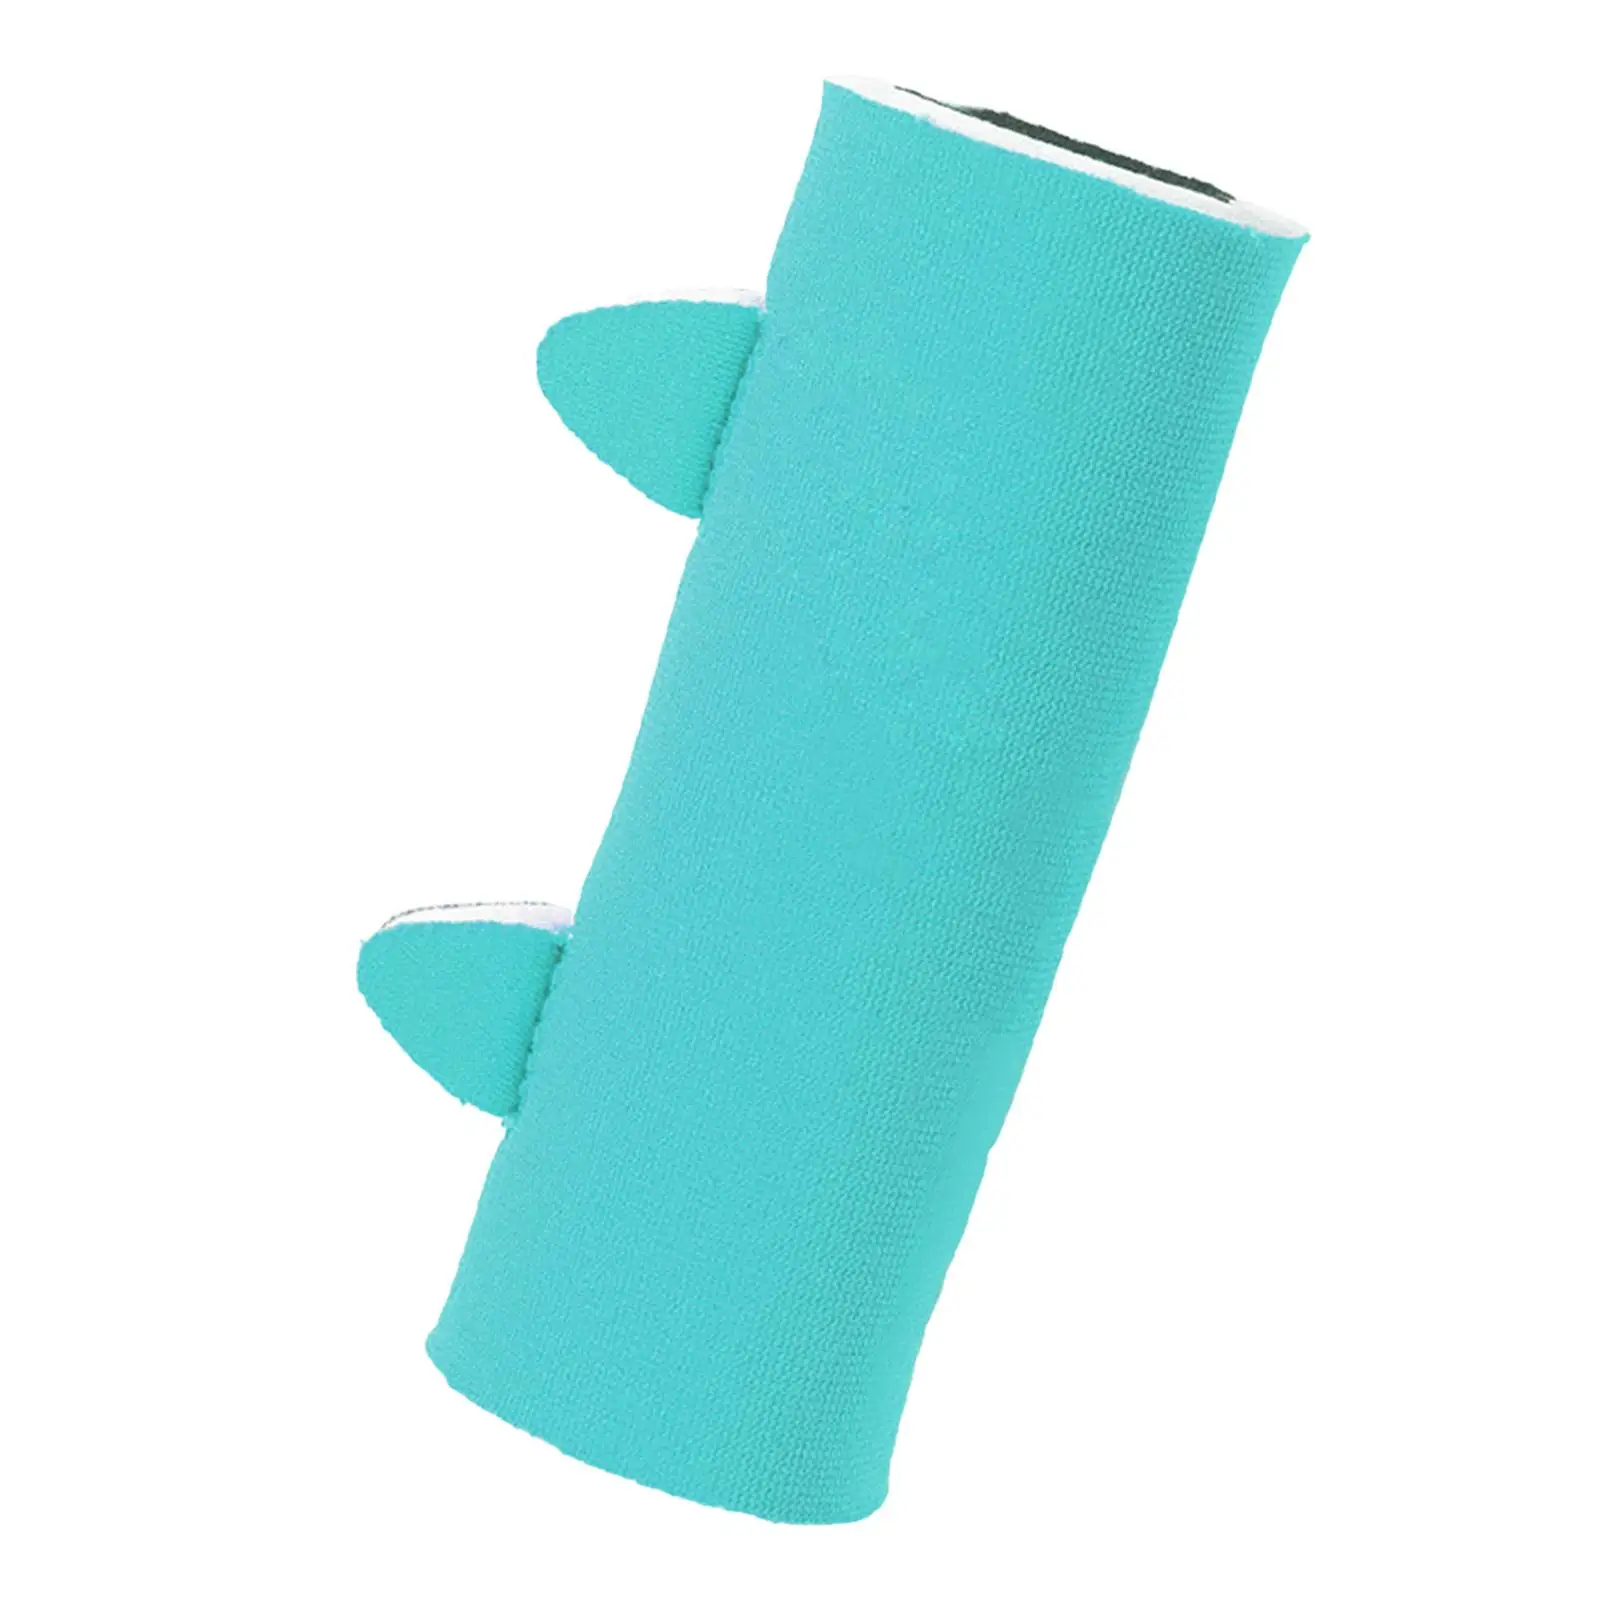 Diving Snorkel Protective Sleeve Snorkeling Durable Waterproof Super Buoyancy Case for Swimming Freediving Diving Accessory